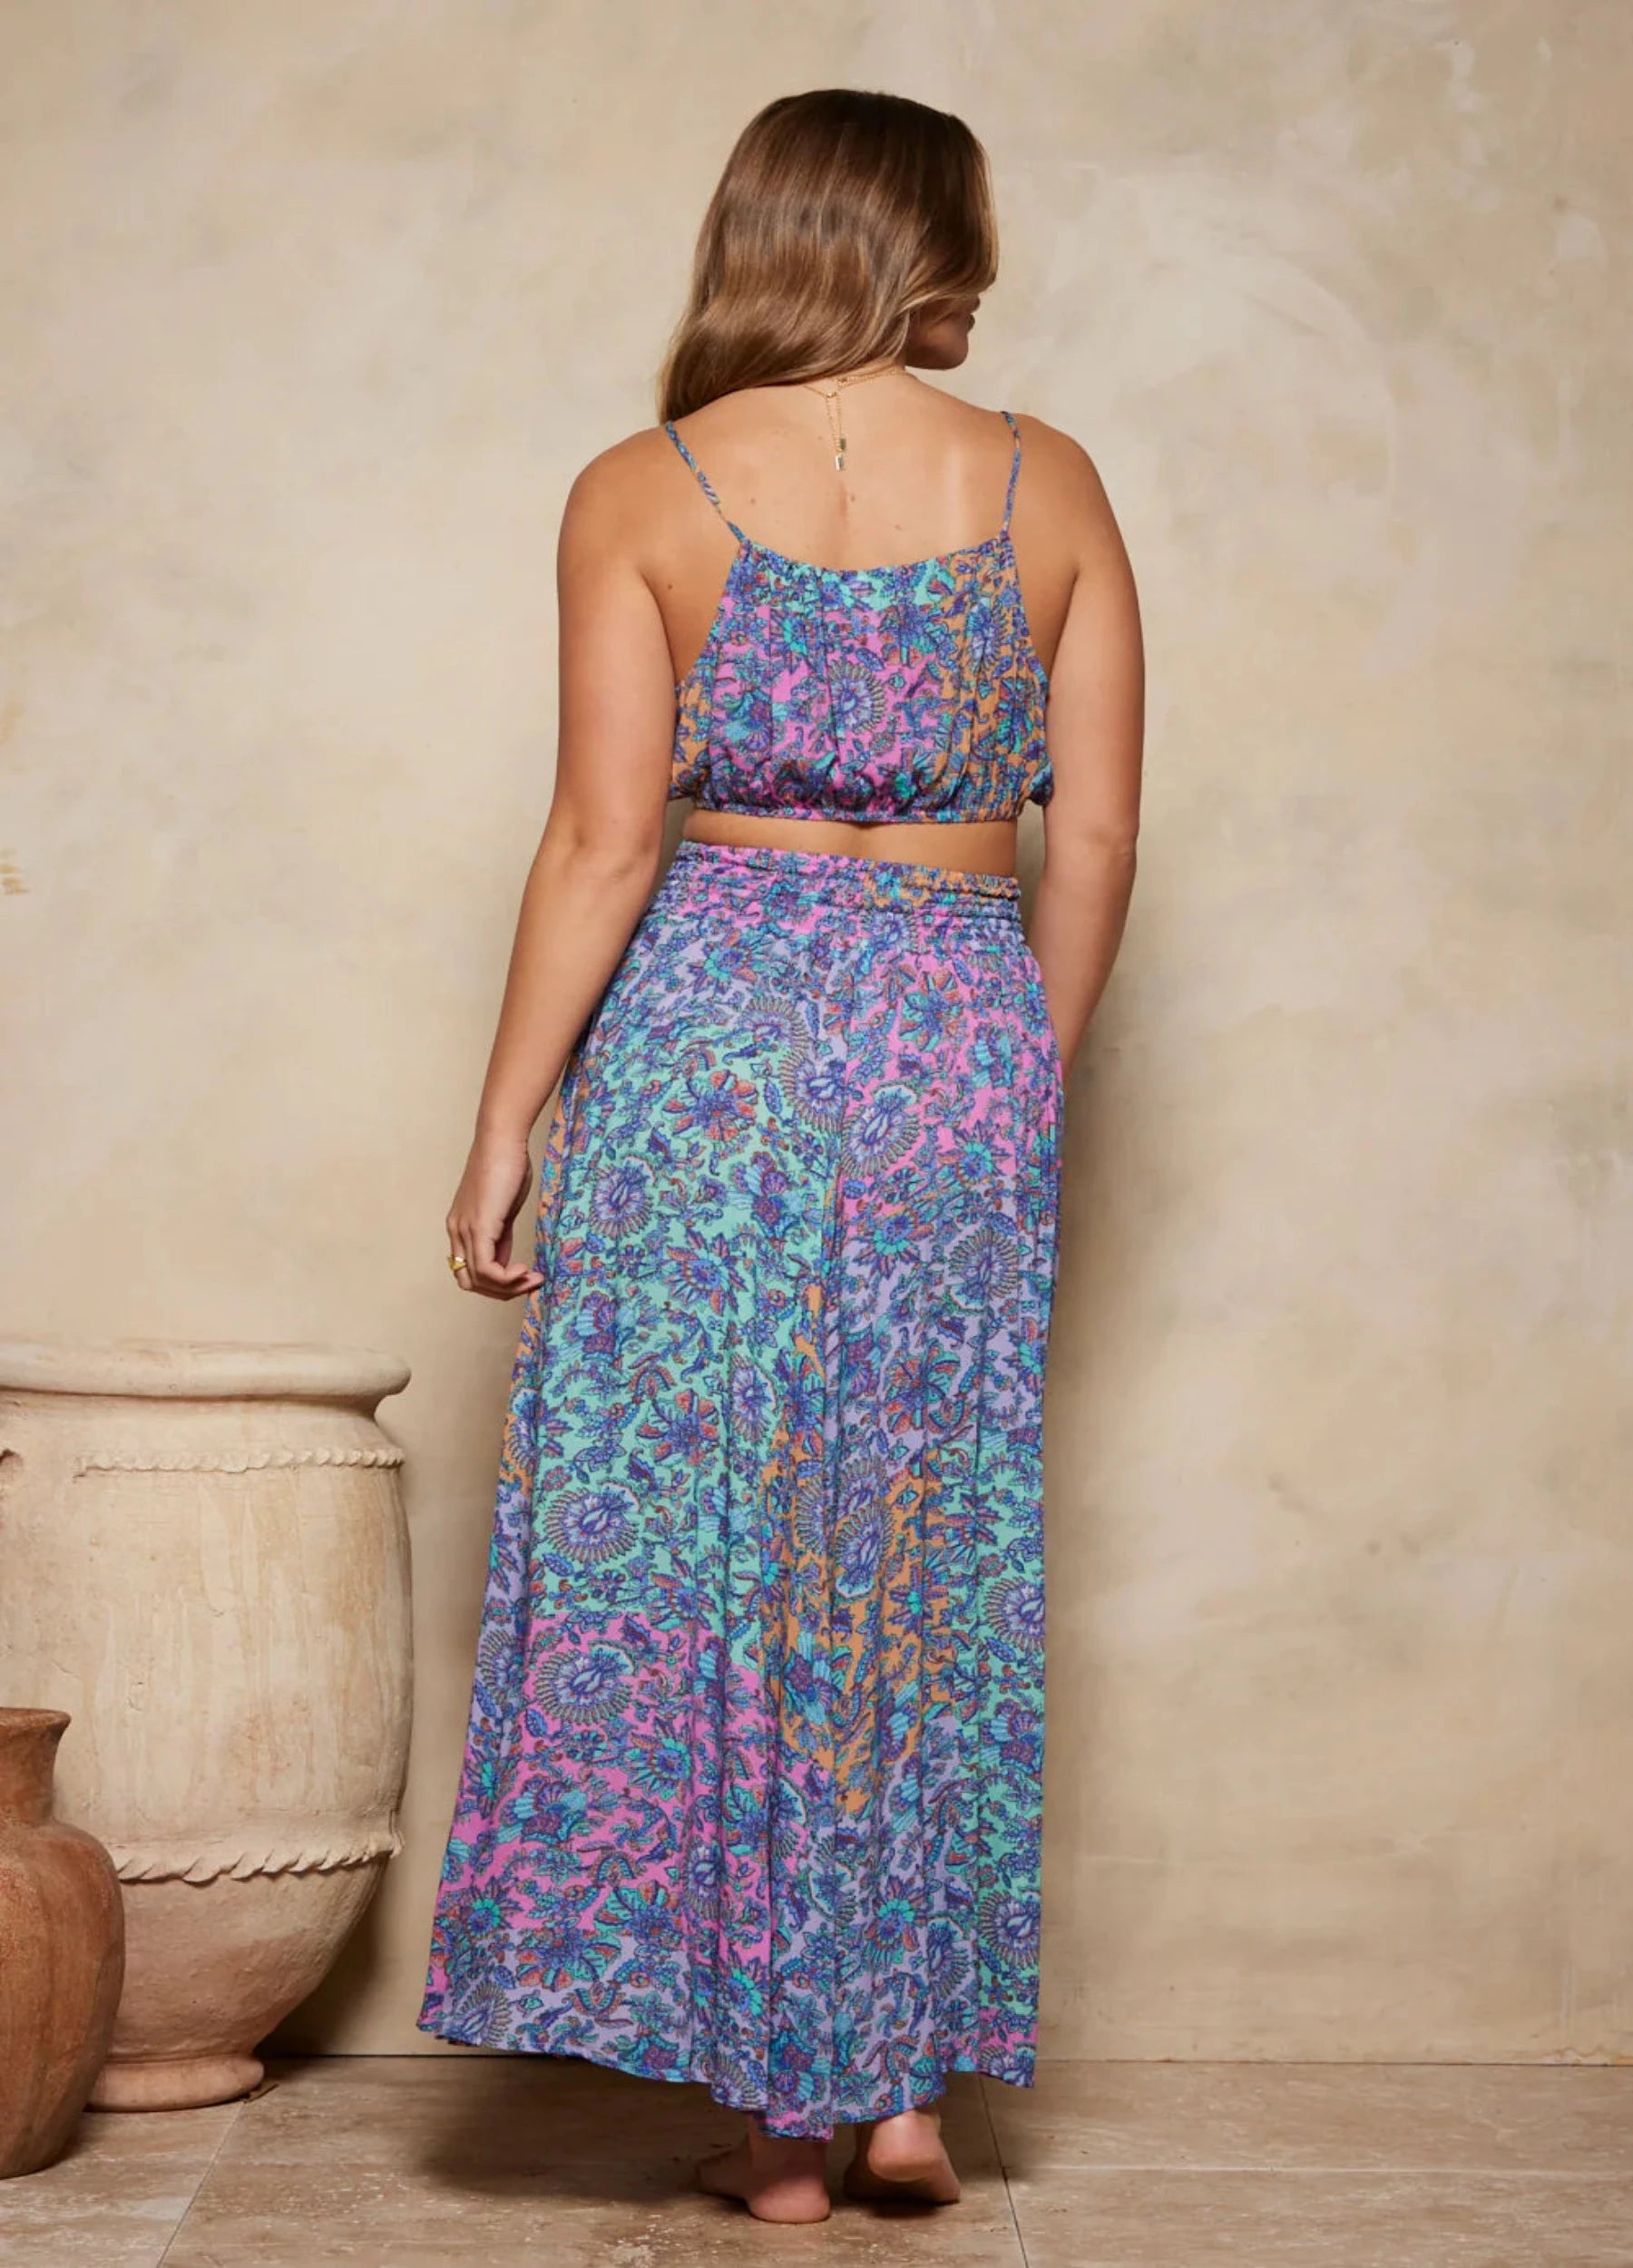 Maxi skirt in kaliopi print from Tigerlily